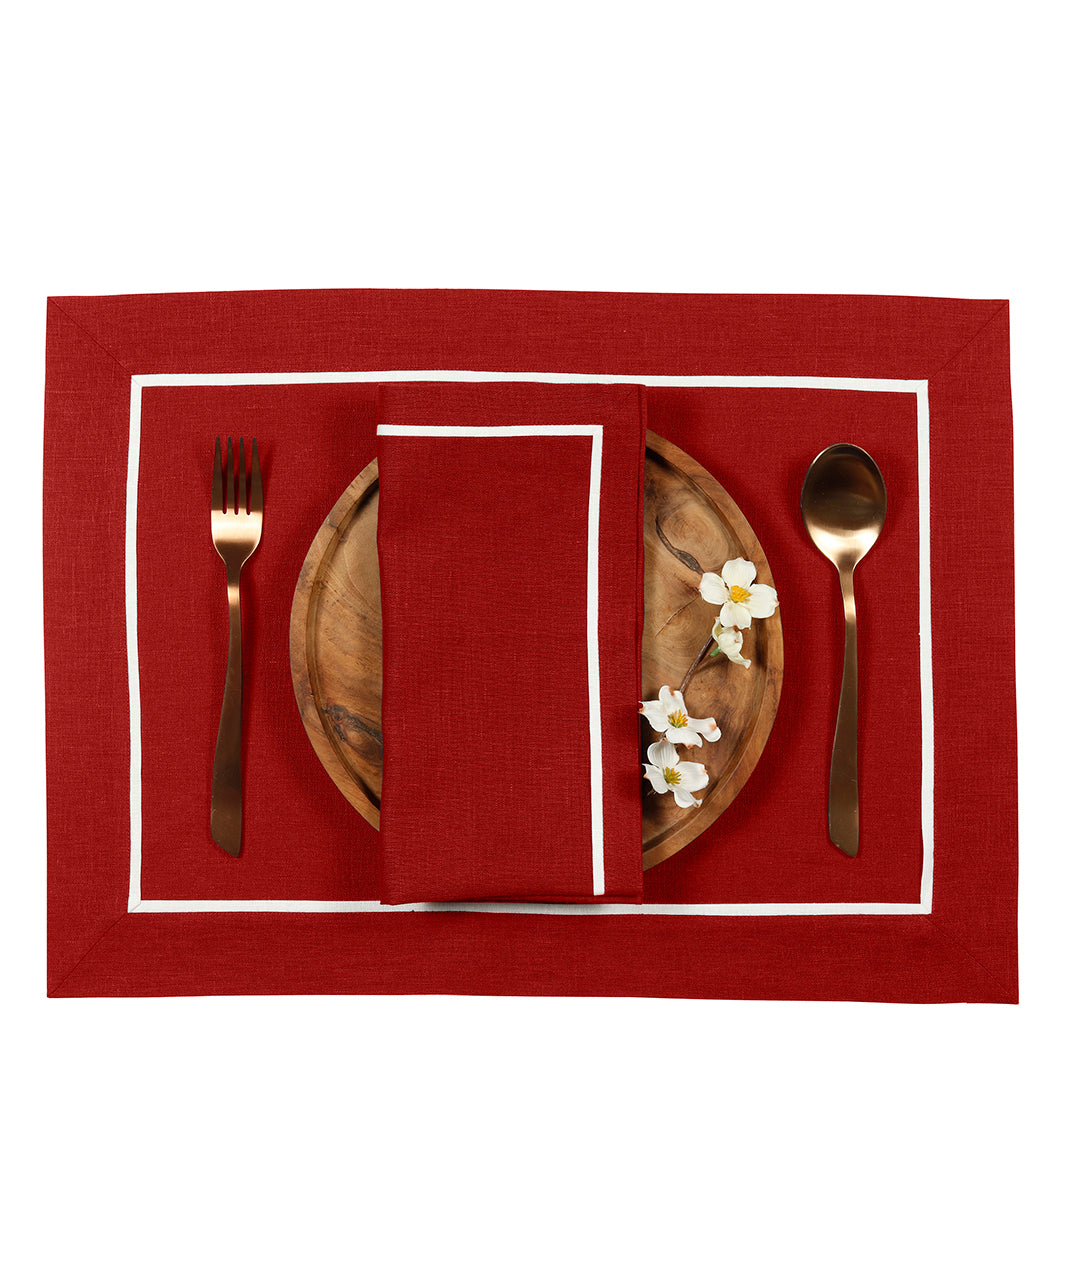 Red & White Linen Placemats 14 x 19 Inch Set of 4 - Reversible